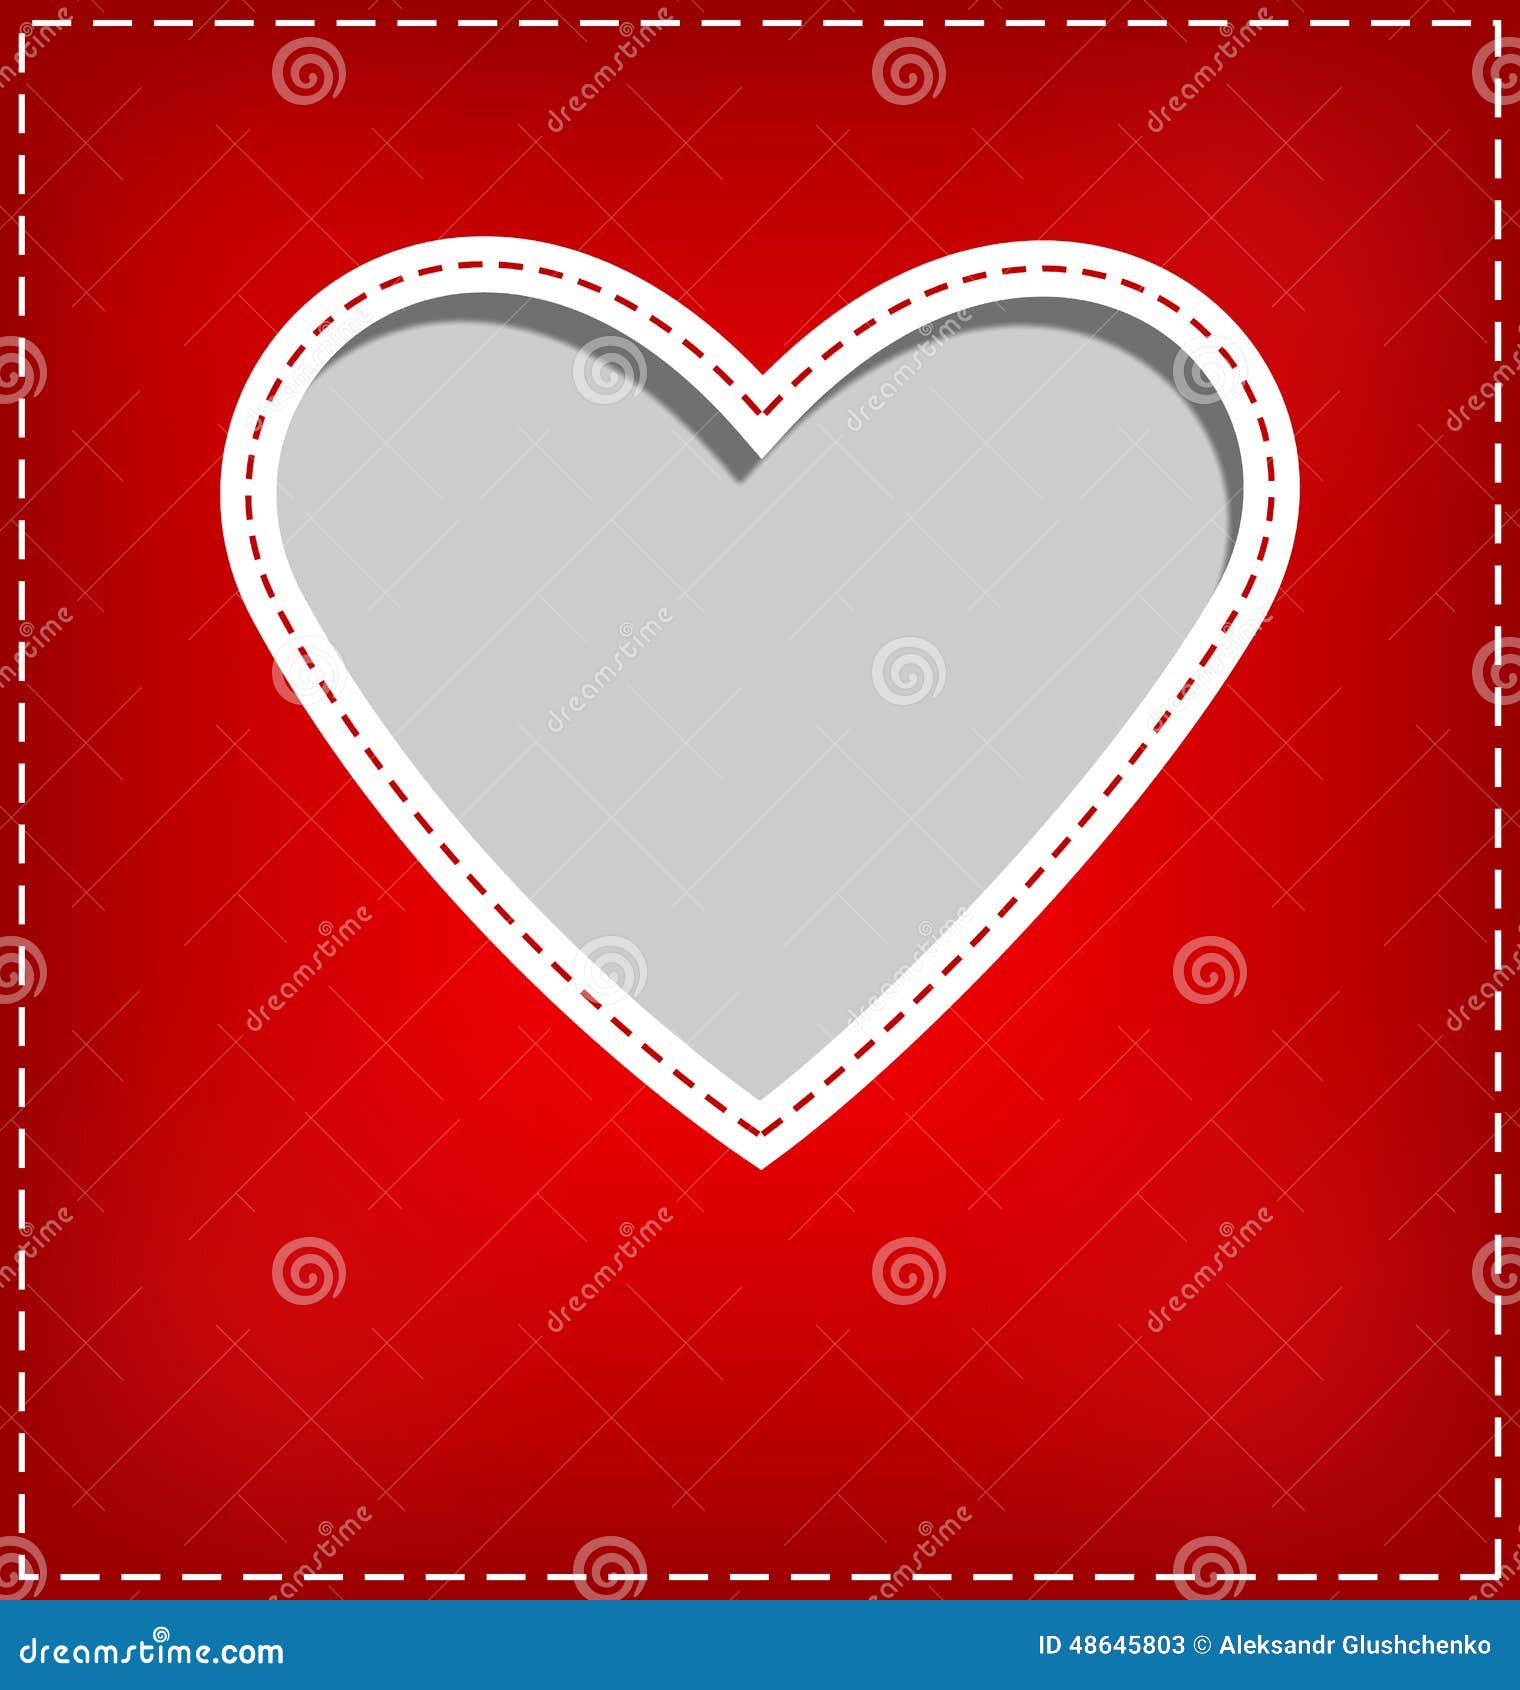 heart cutout in red card on grey